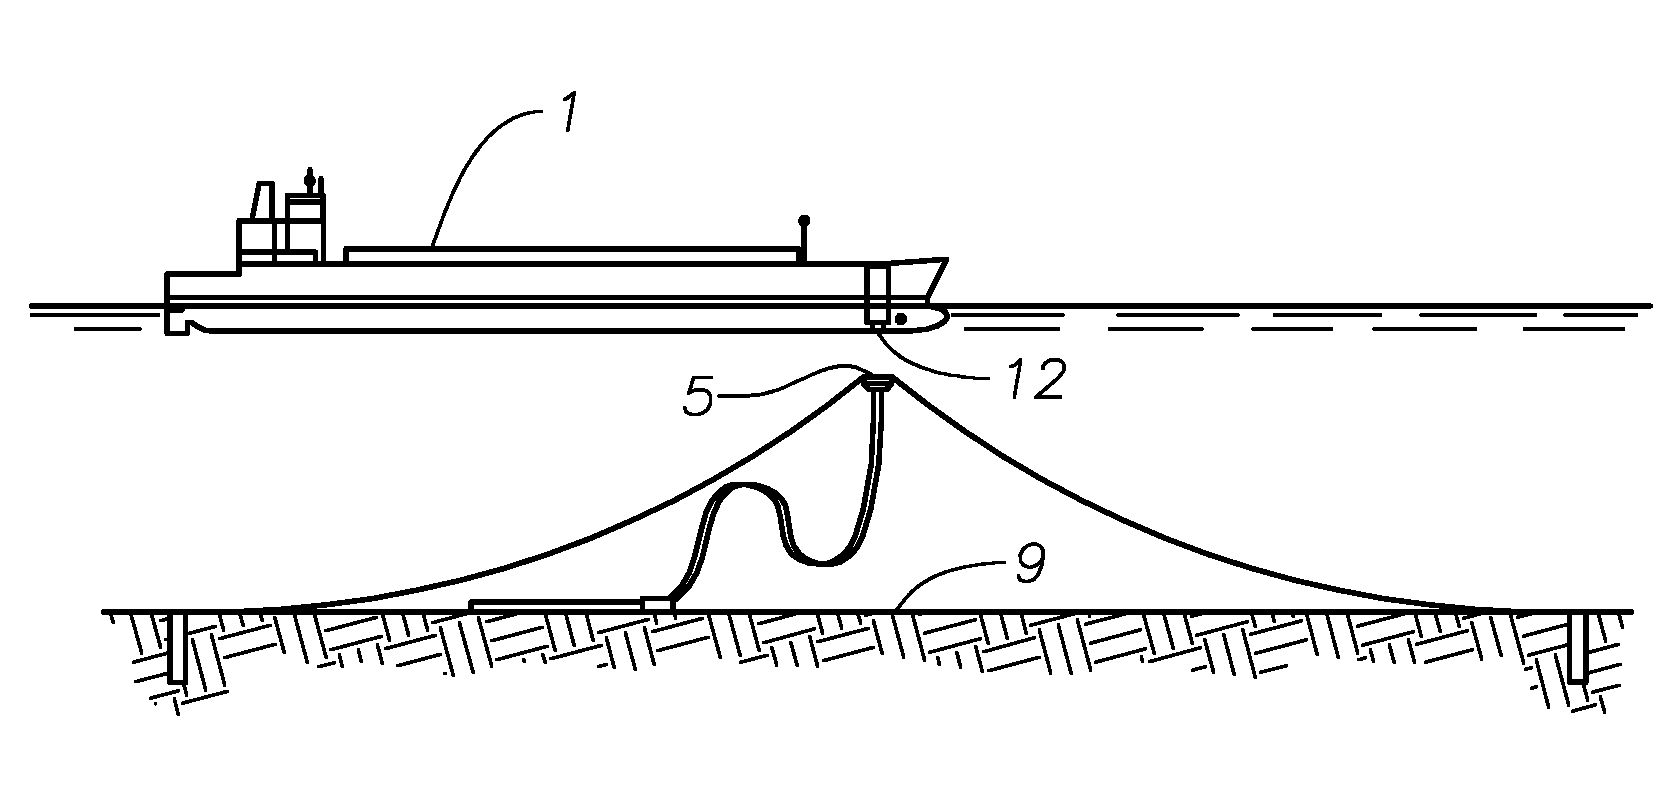 Detachable mooring and fluid transfer system